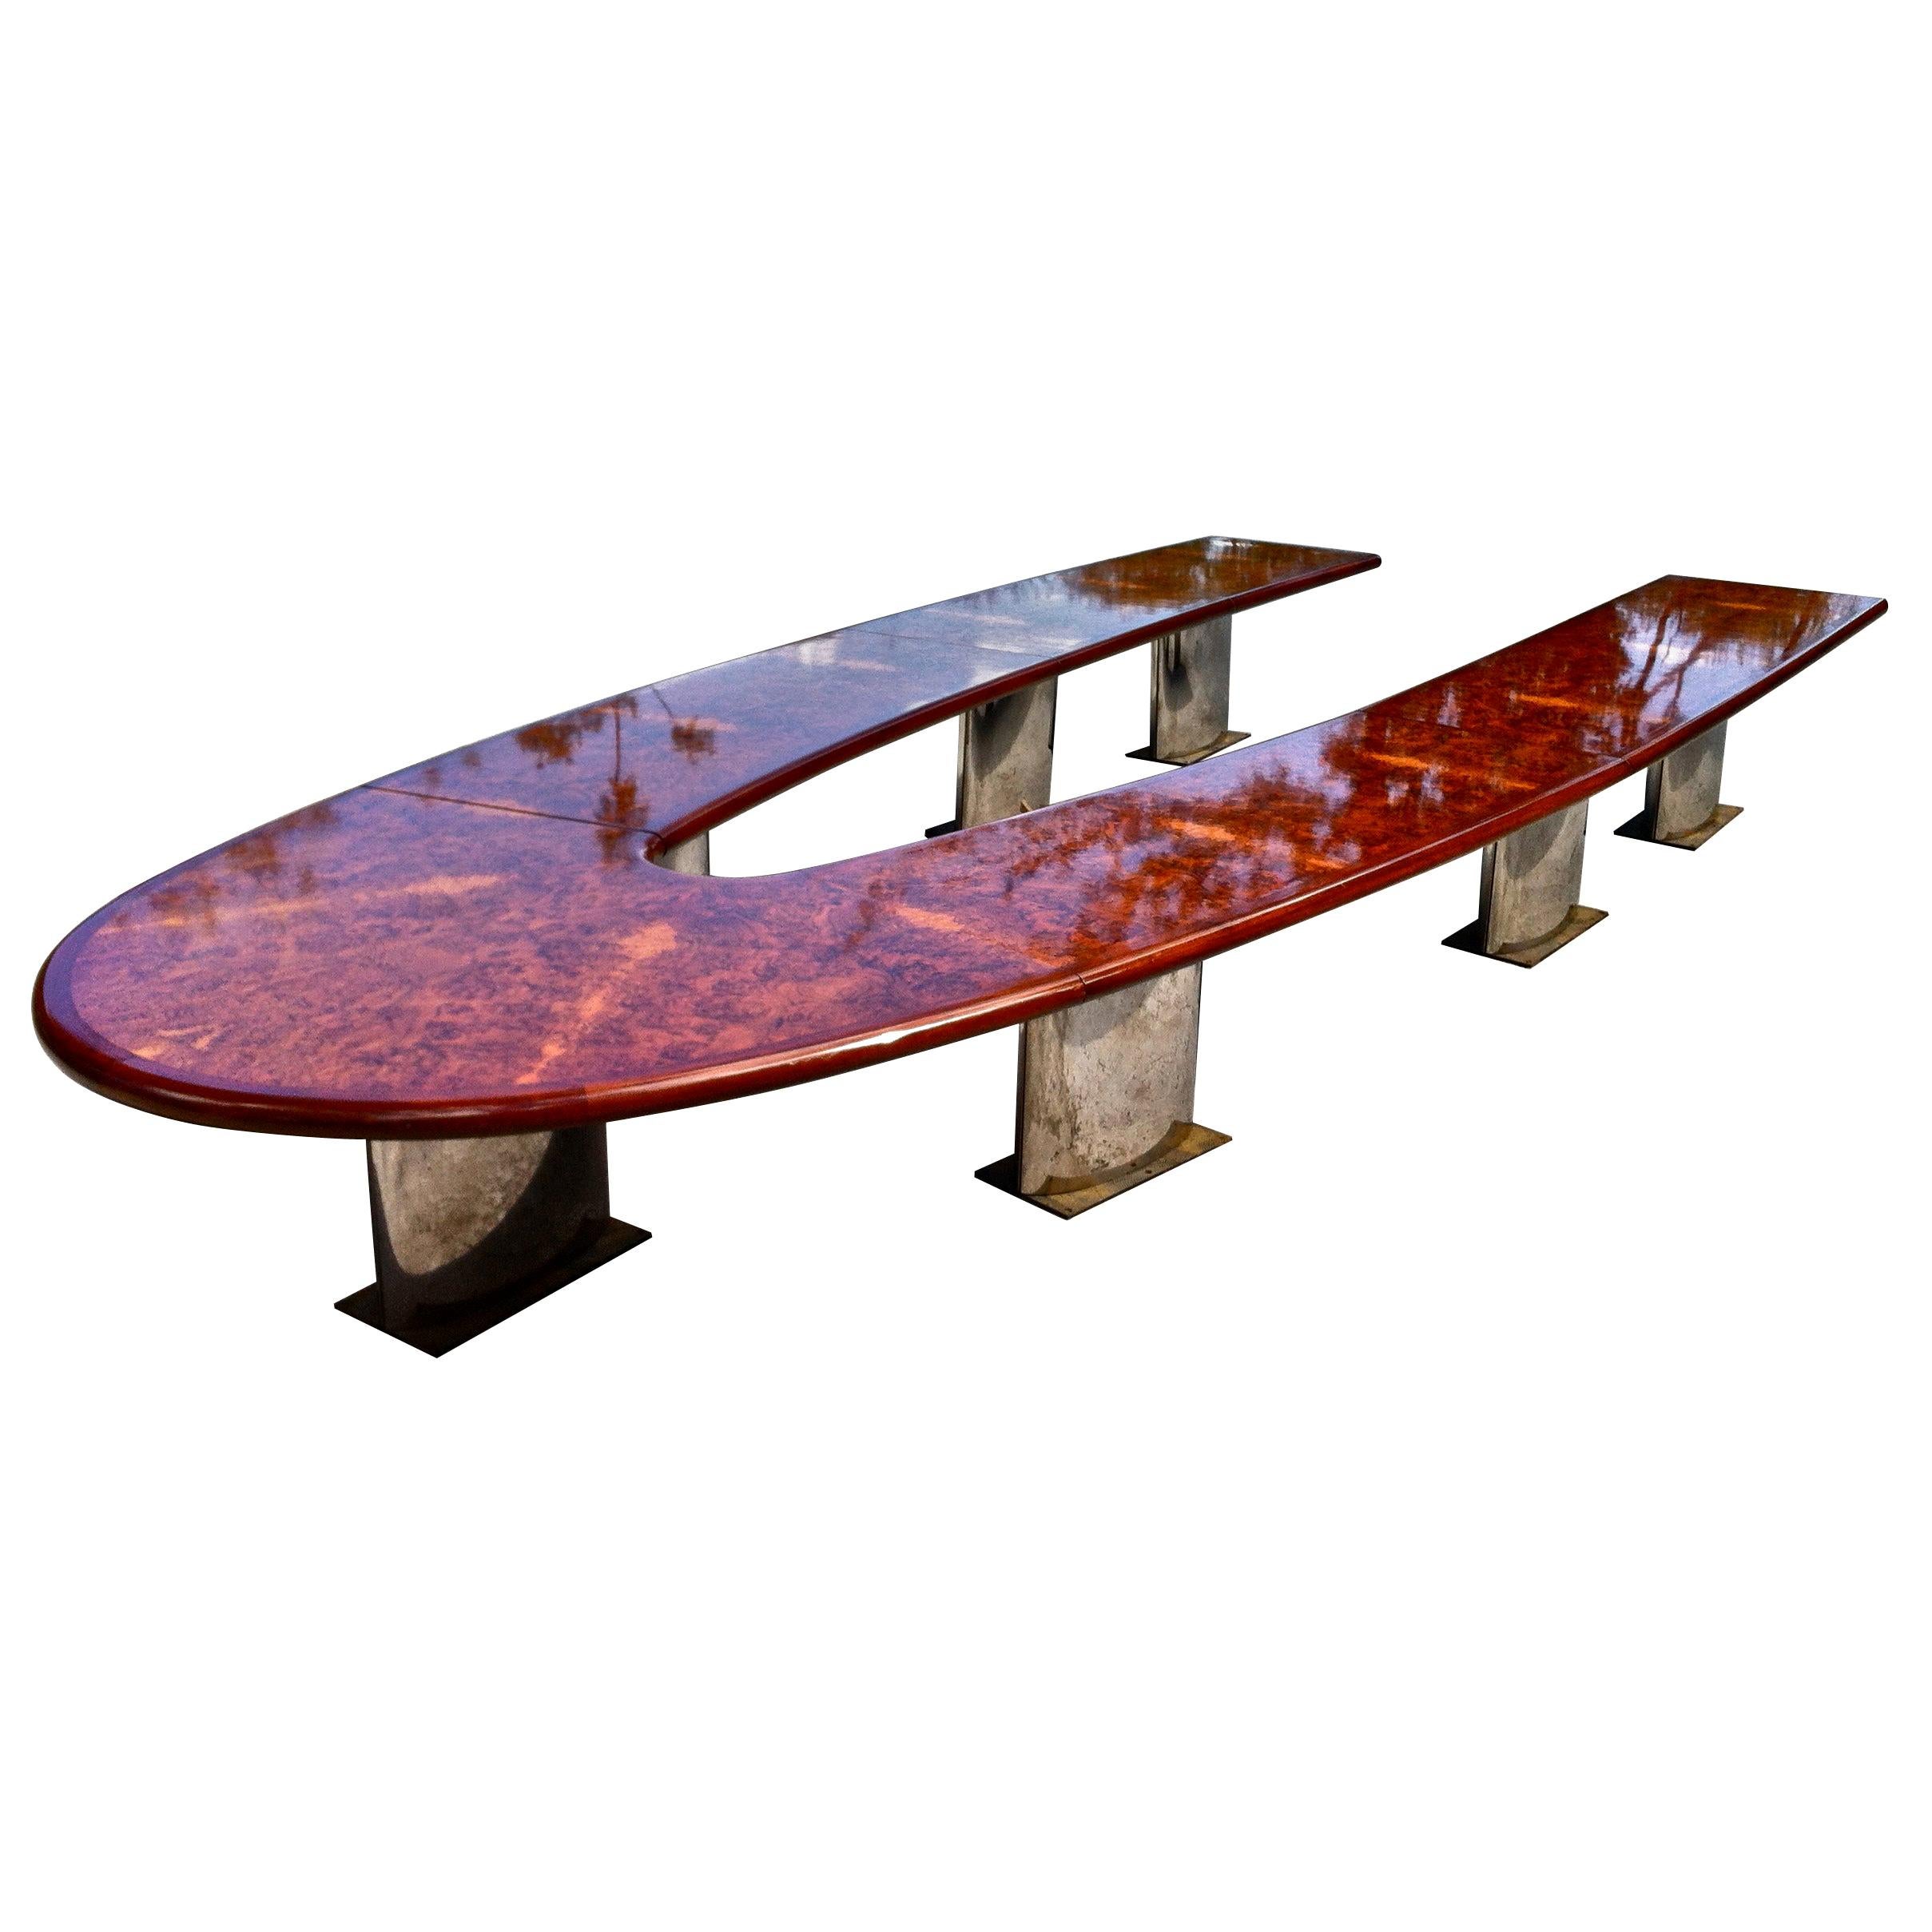 American Mid-Century Modern Conference Table Made for U.S. Steel Corporation For Sale